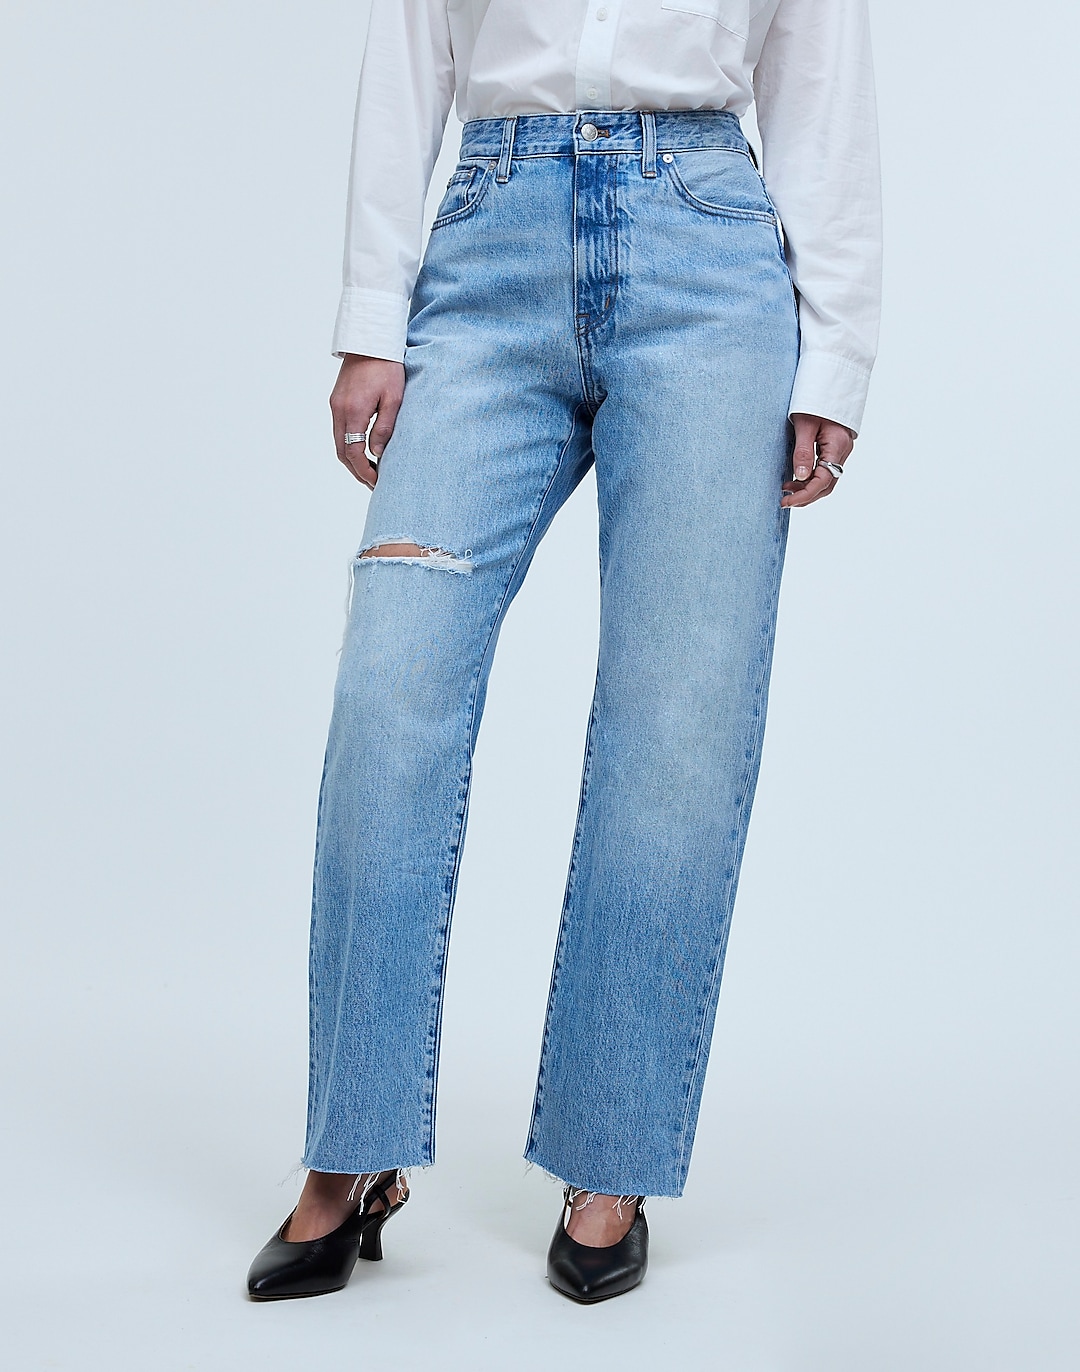 Madewell Curvy Jeans Review: Why They're My Favorite : StyleWise